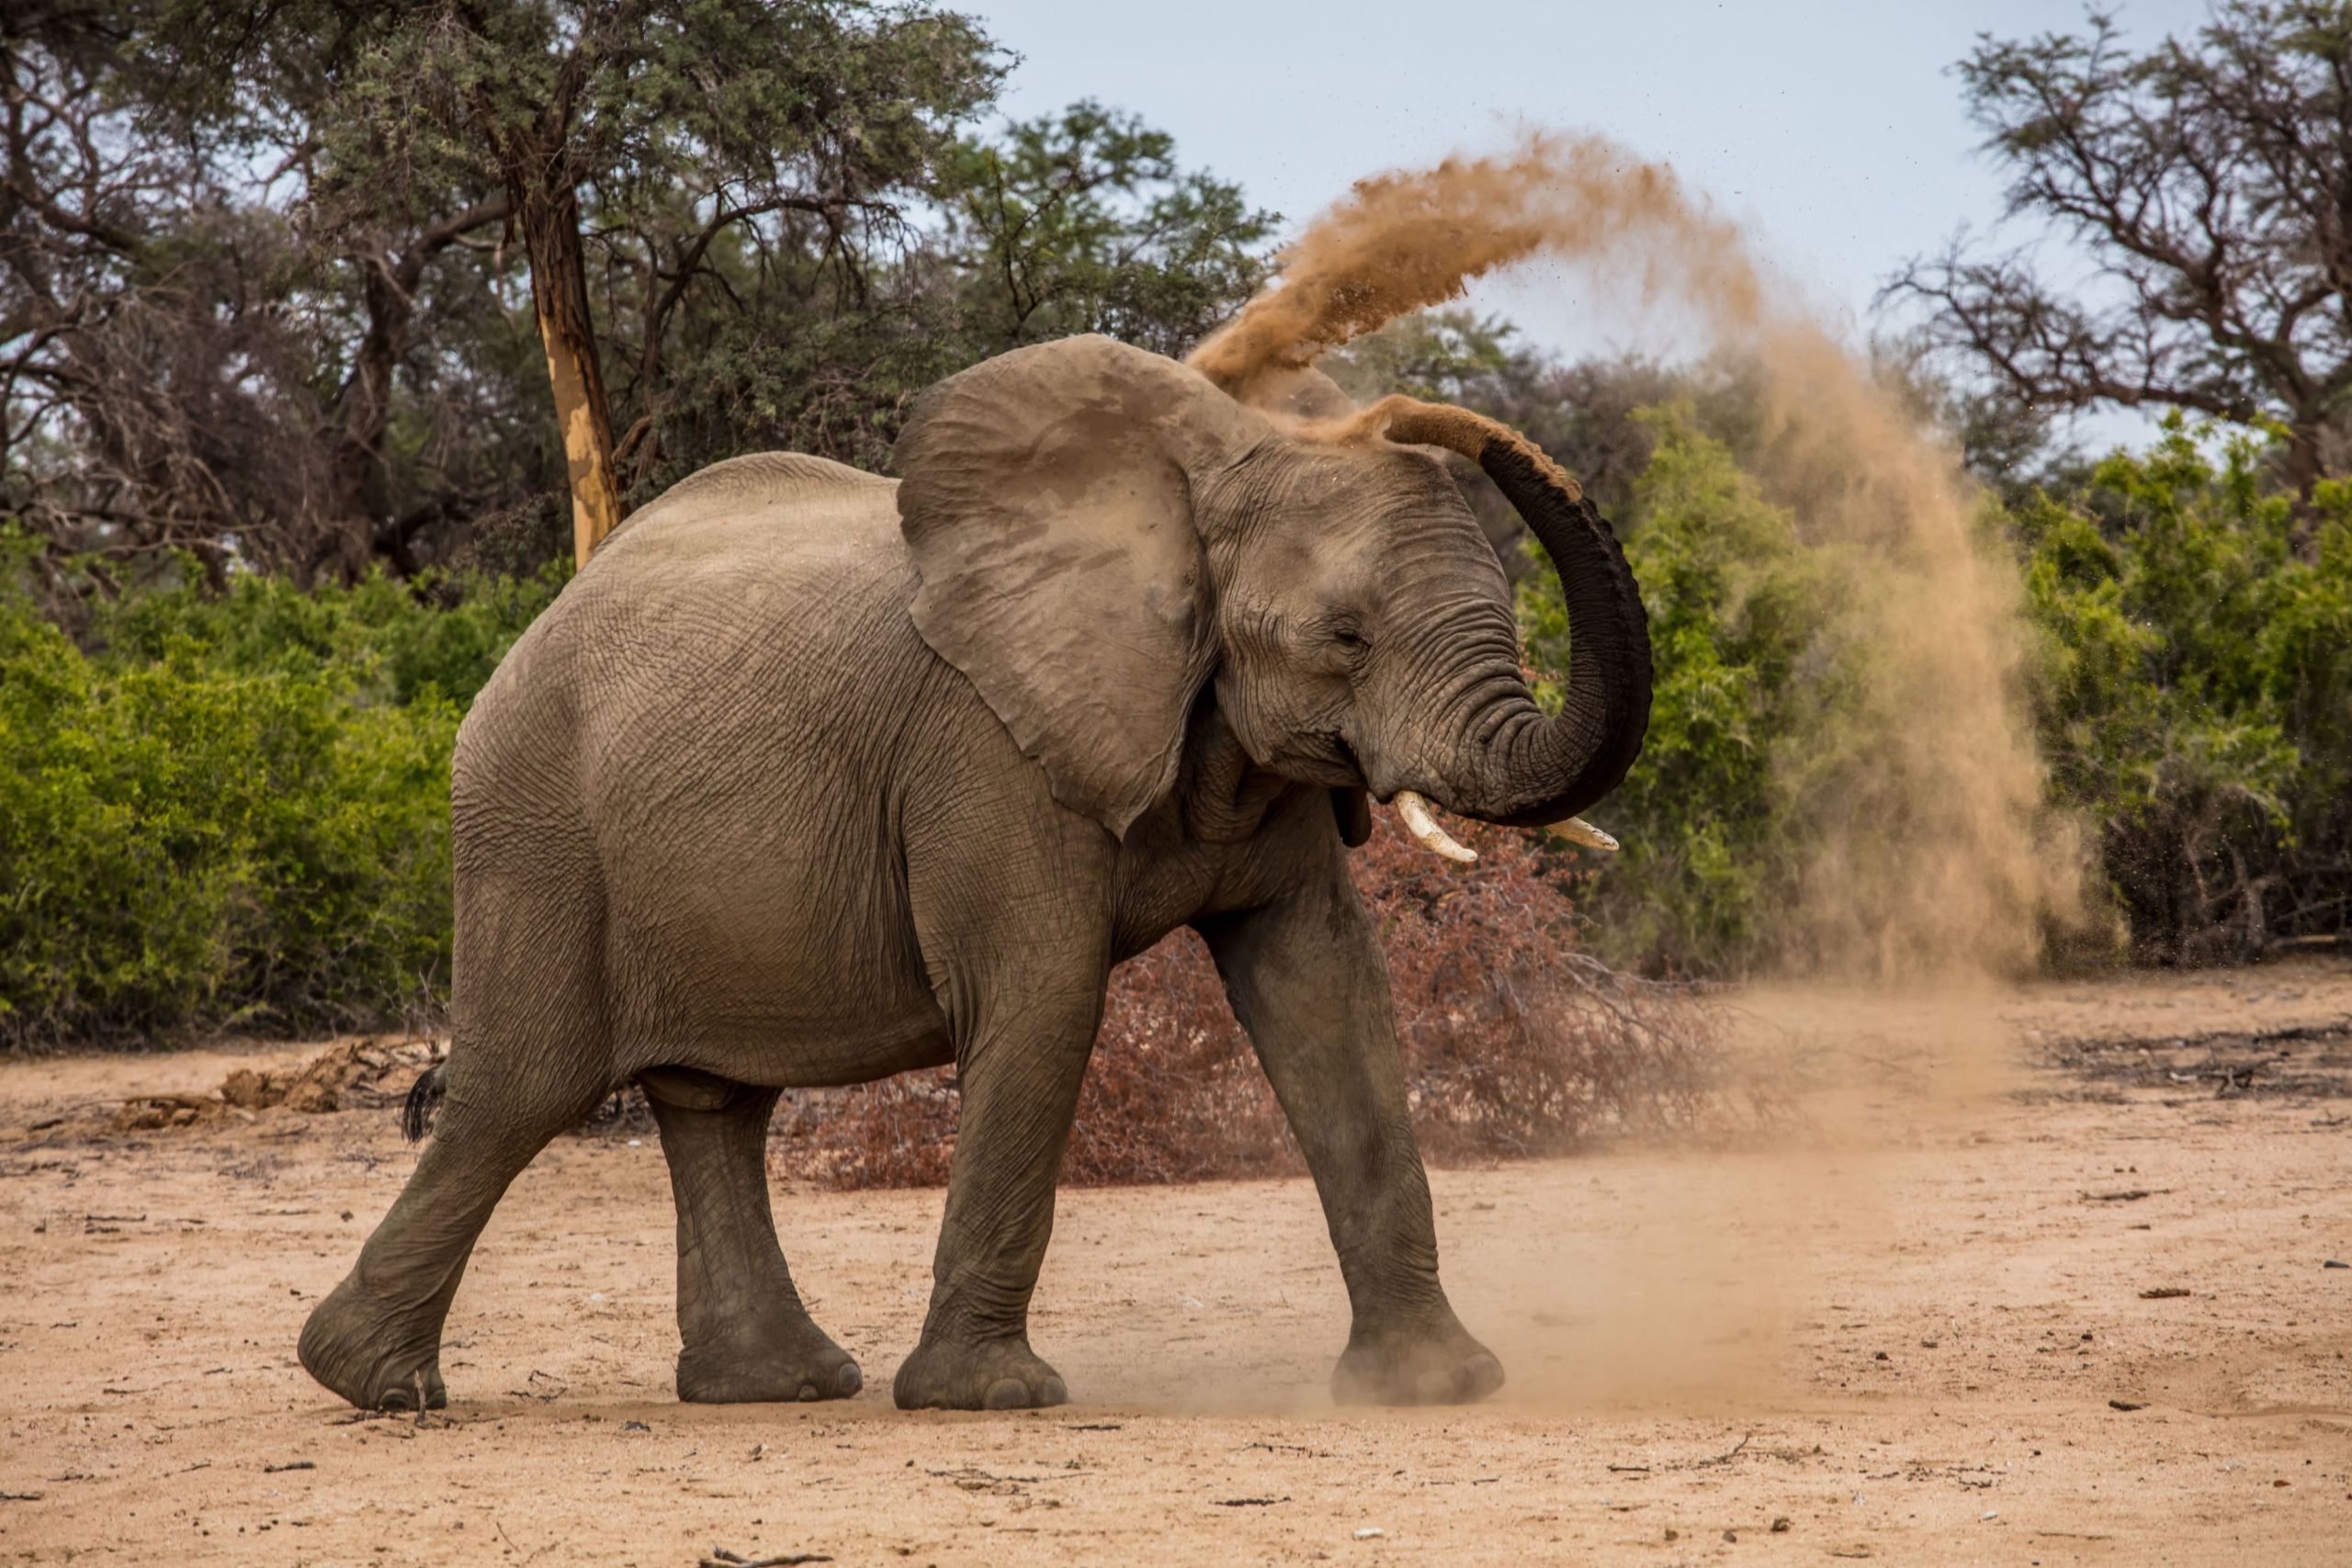 Elephant gives itself and dust bath by using is trying to fling dirt over it's back in Namibia